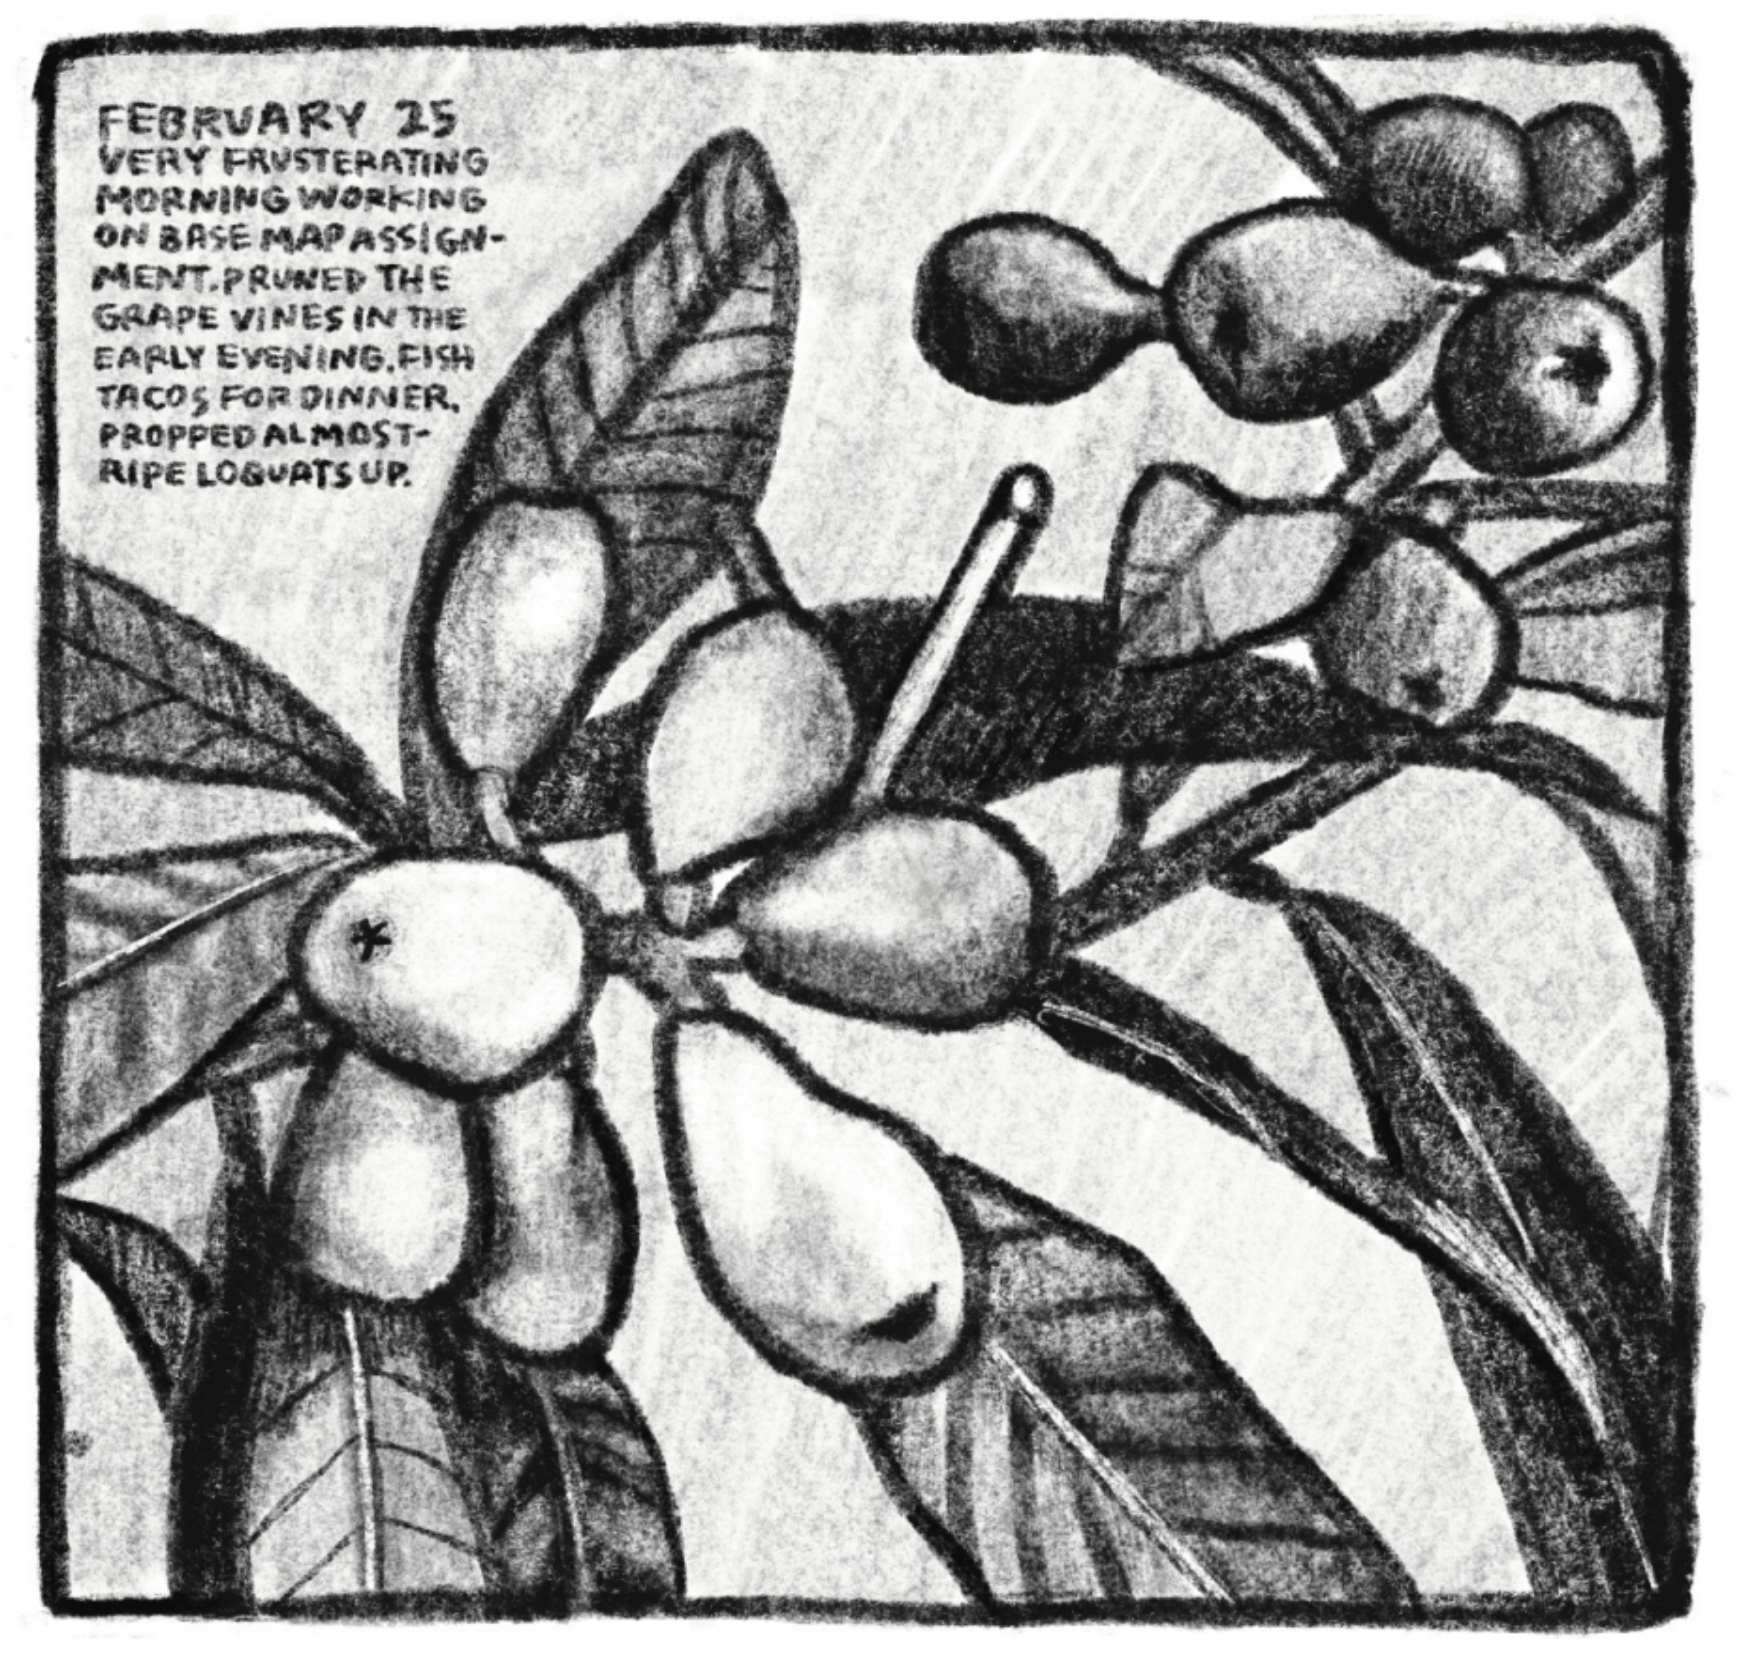 Hold Still Episode 10, Panel 2
Upper left corner reads: "FEBRUARY 25
VERY FRUSTERATING MORNING WORKING ON BASE MAP ASSIGNMENT. PRUNED THE GRAPE VINES IN THE EARLY EVENING. FISH TACOS FOR DINNER. PROPPED ALMOST-RIPE LOQUATS UP."
Drawing of a loquat tree close-up.